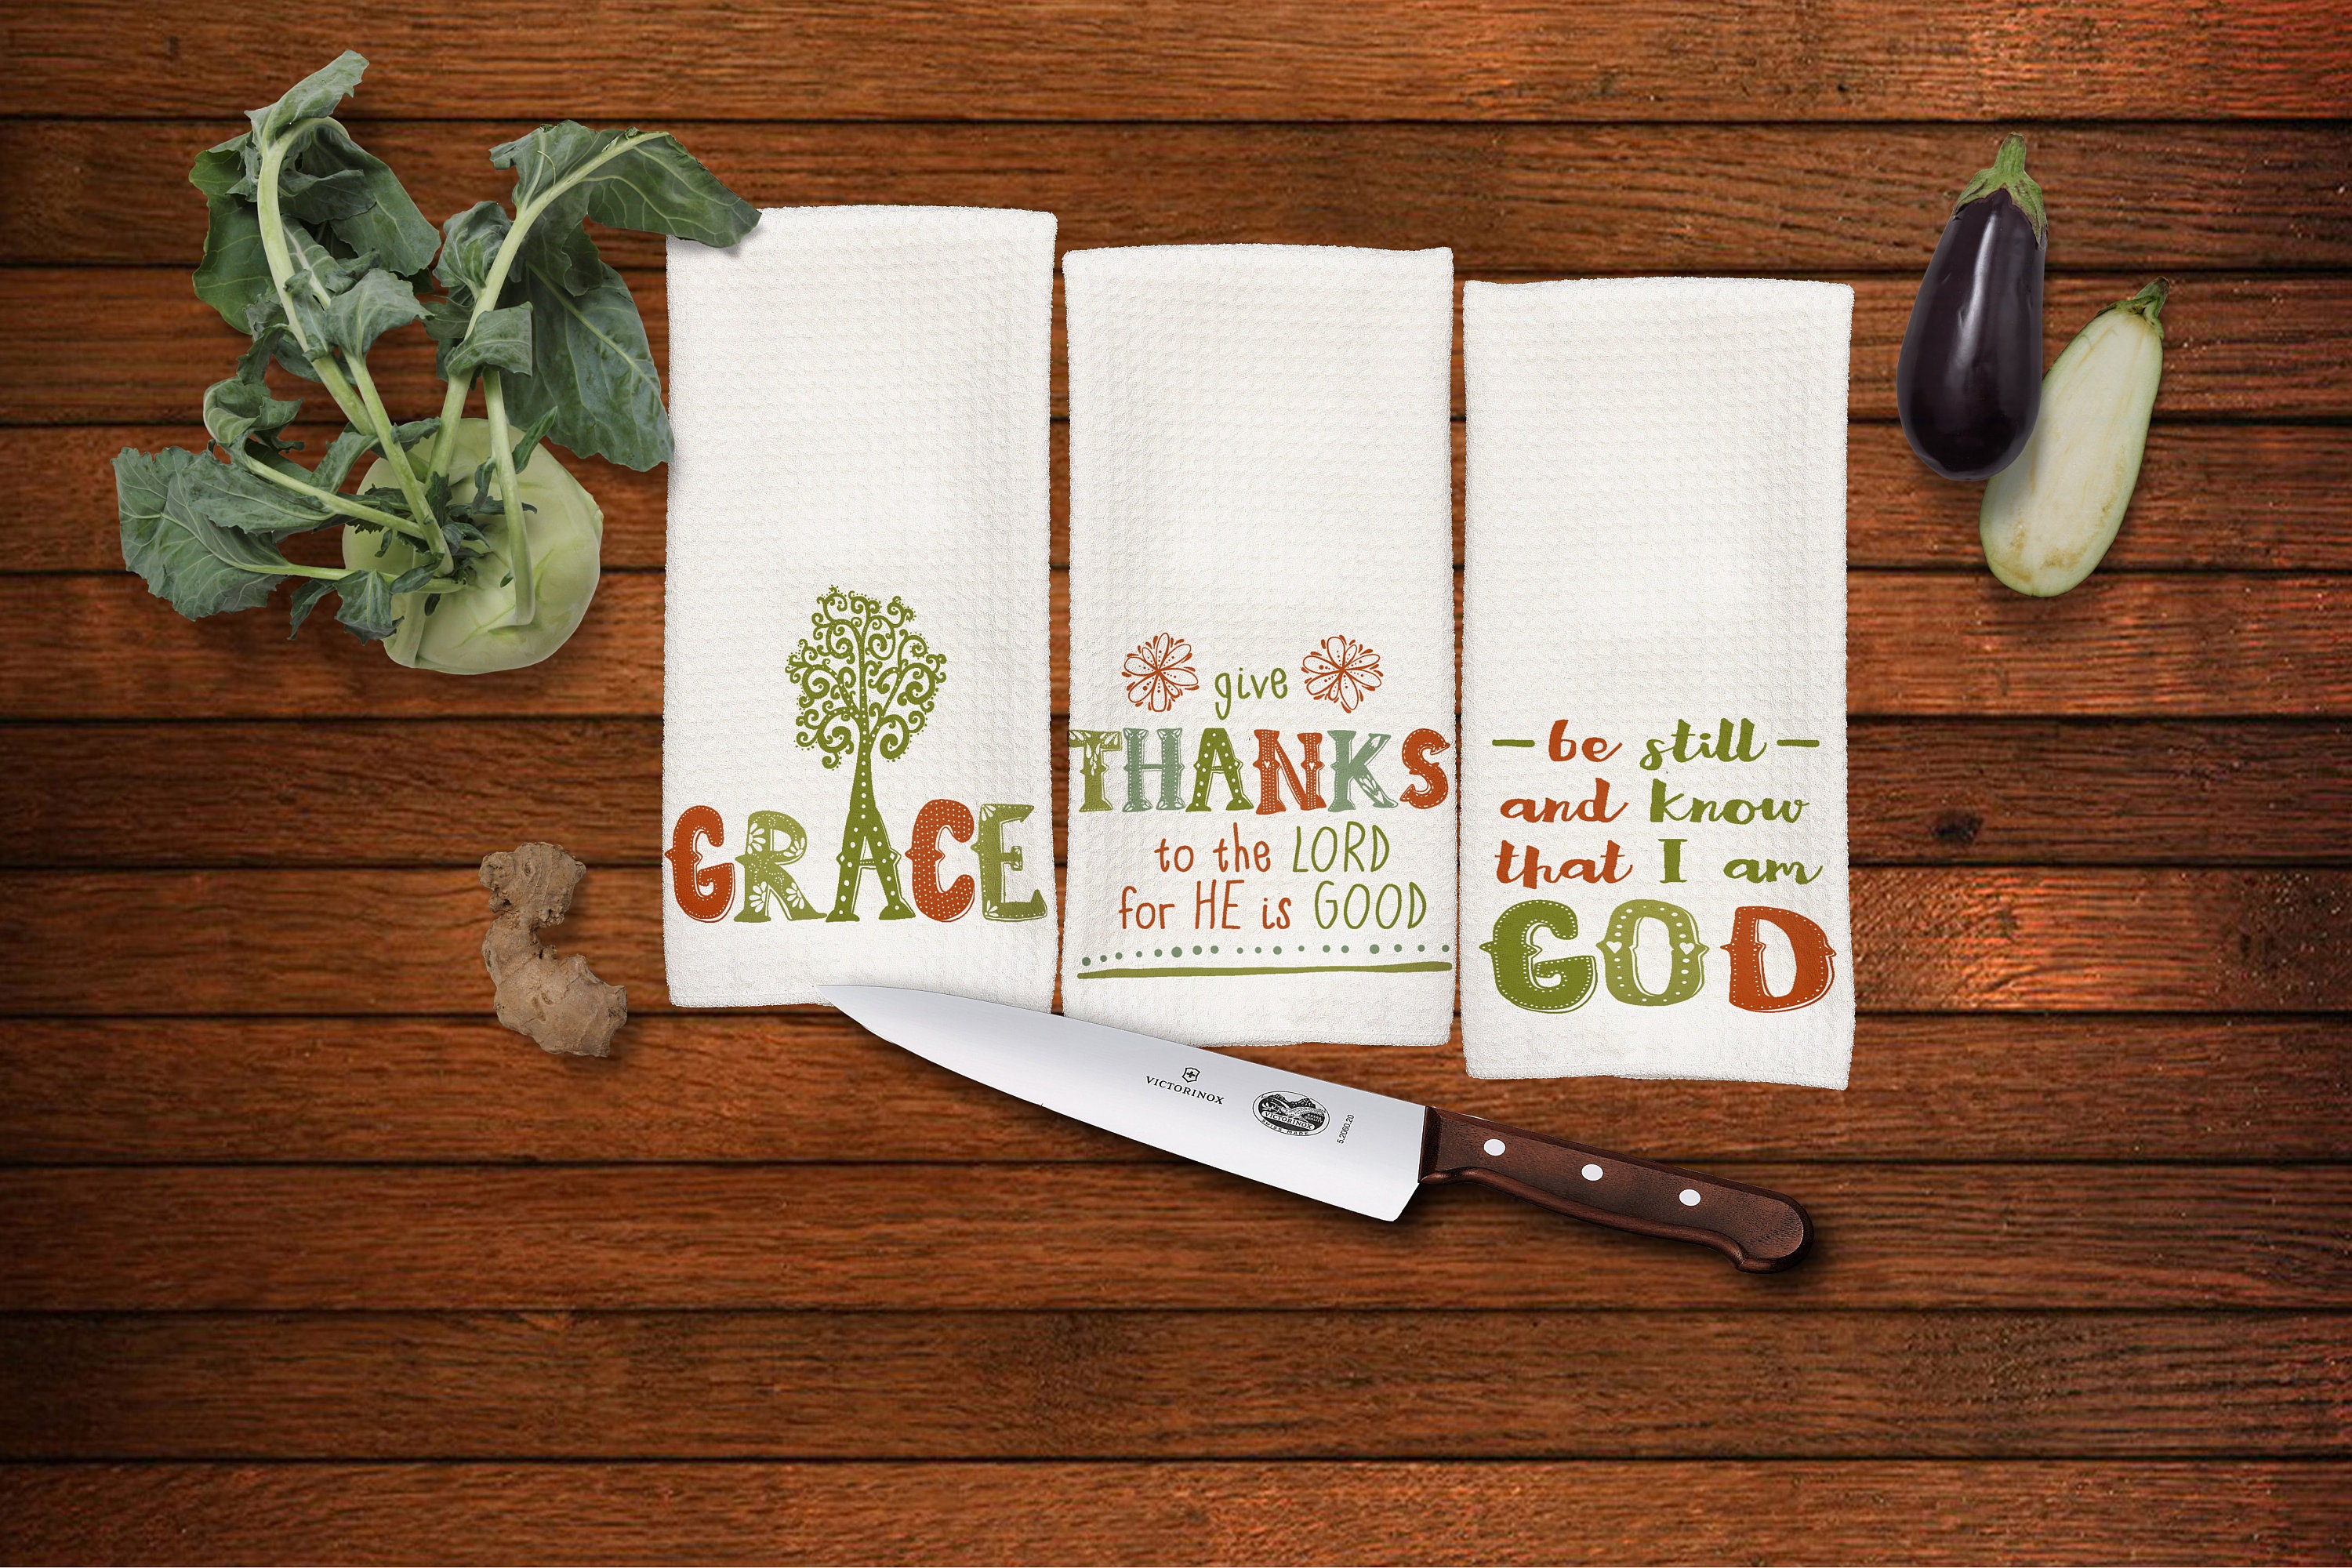 Funny Kitchen Towels, Cute Dish Towels and Dishcloths Sets of 4 with  Sayings Quotes, Fun Taco Jam Bacon Bundts tive Tea Hand Towels Housewarming  Gifts Decor for New Home Bathroom 